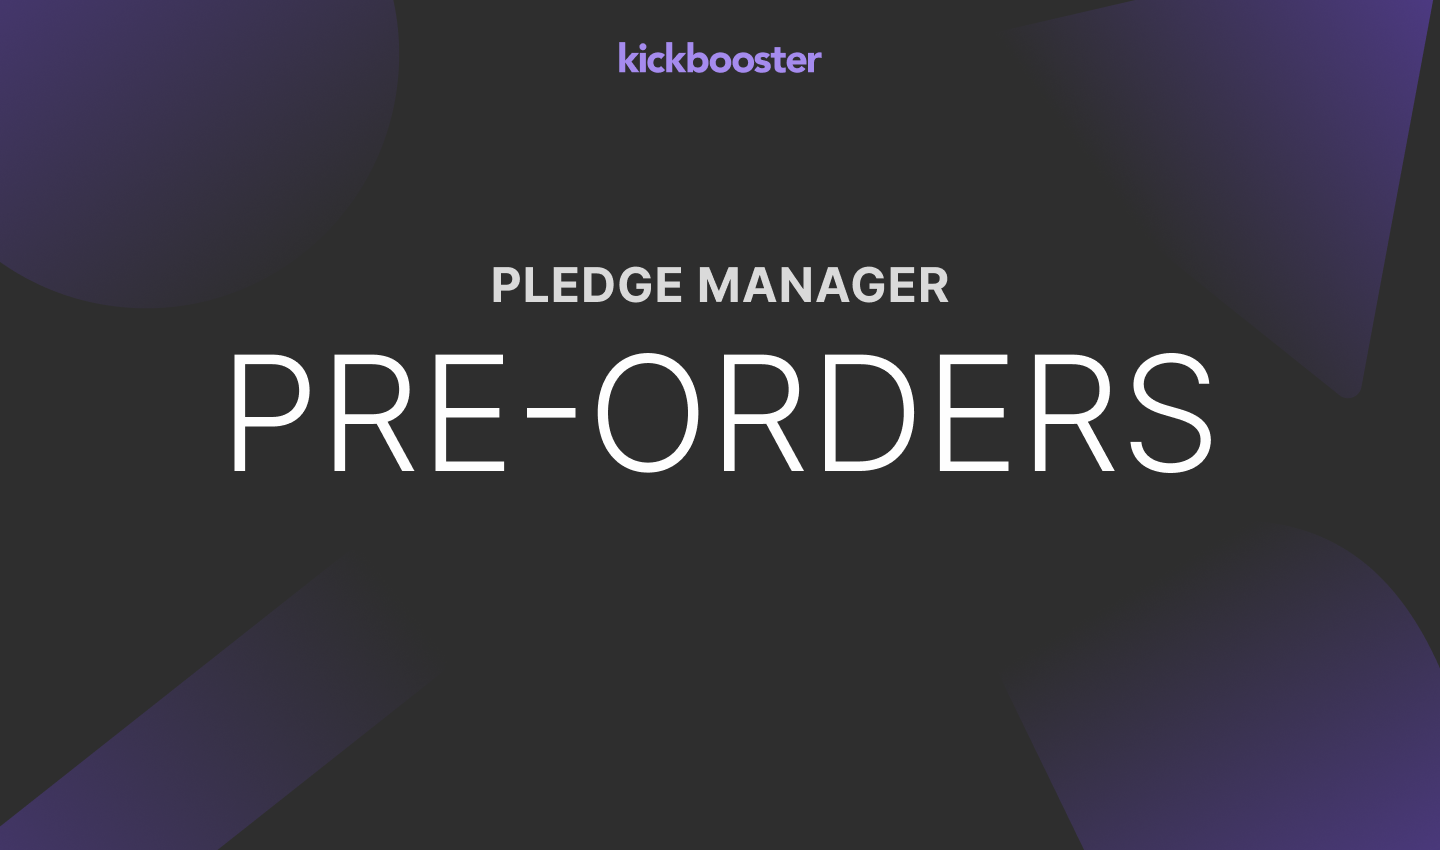 Case study cover: Pledge manager pre-orders